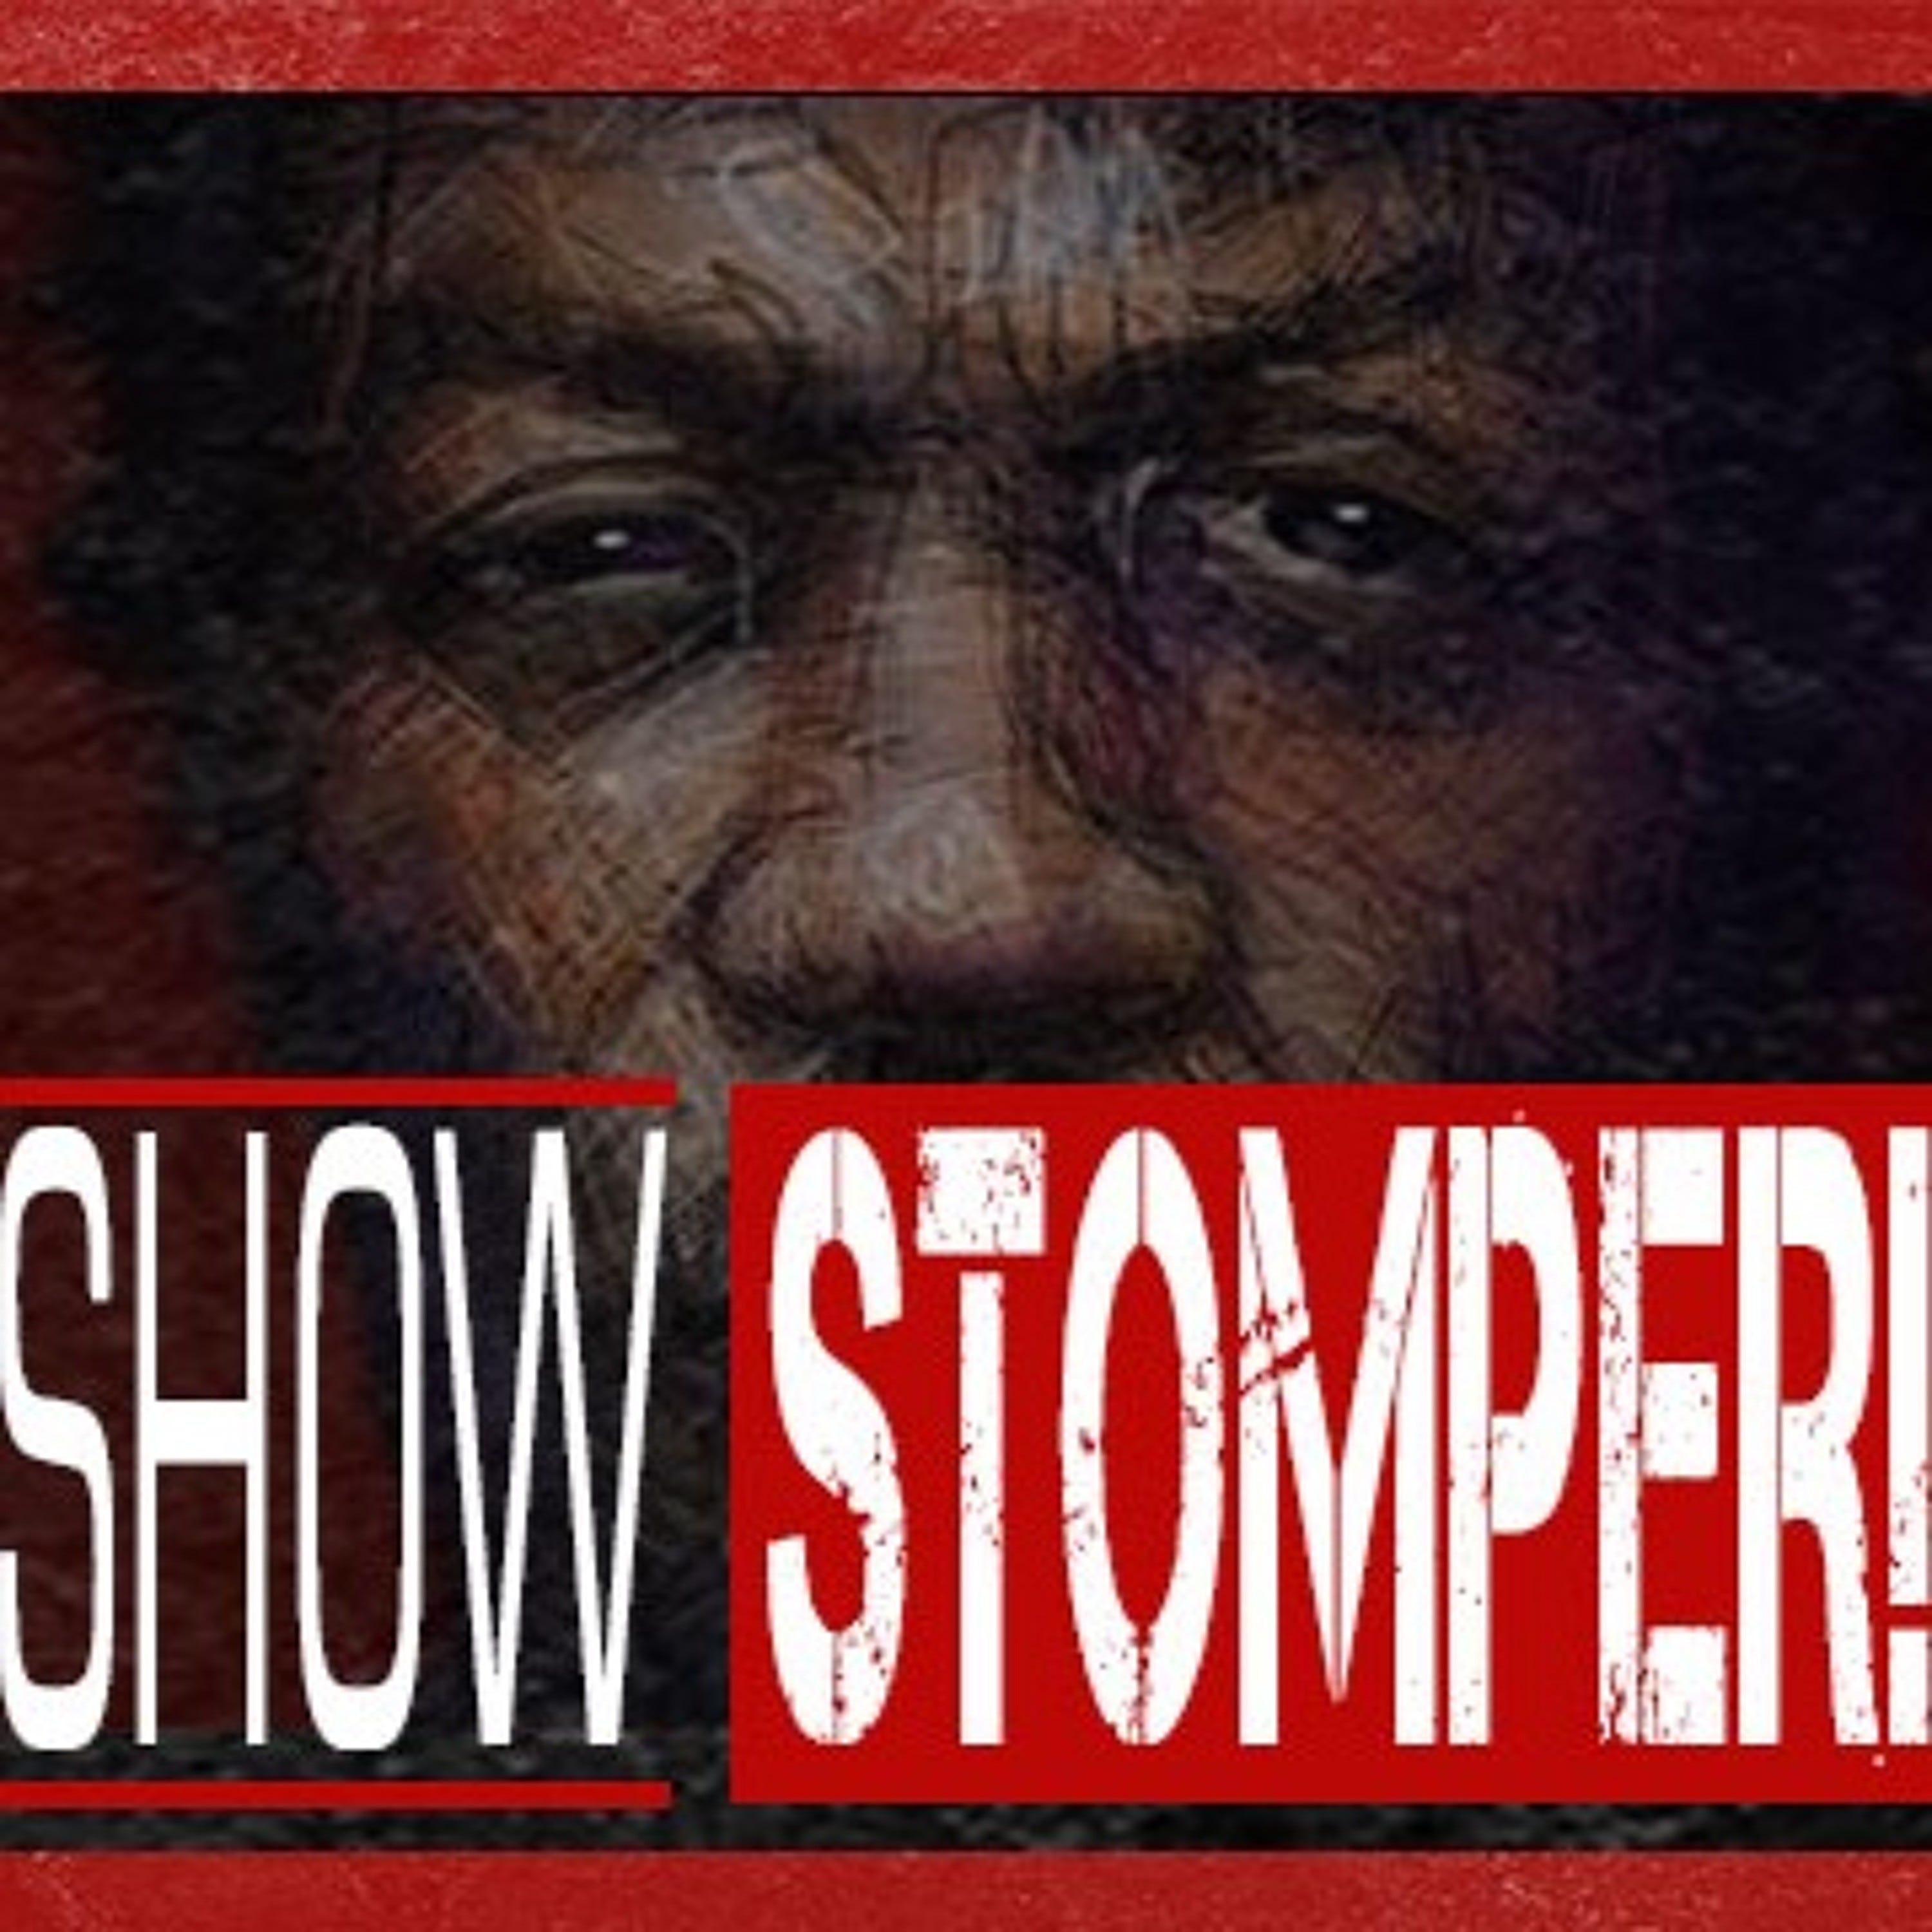 V.93 The State Of The MMA Union On The Holiday Edition Of The Eugene S. Robinson Show Stomper!